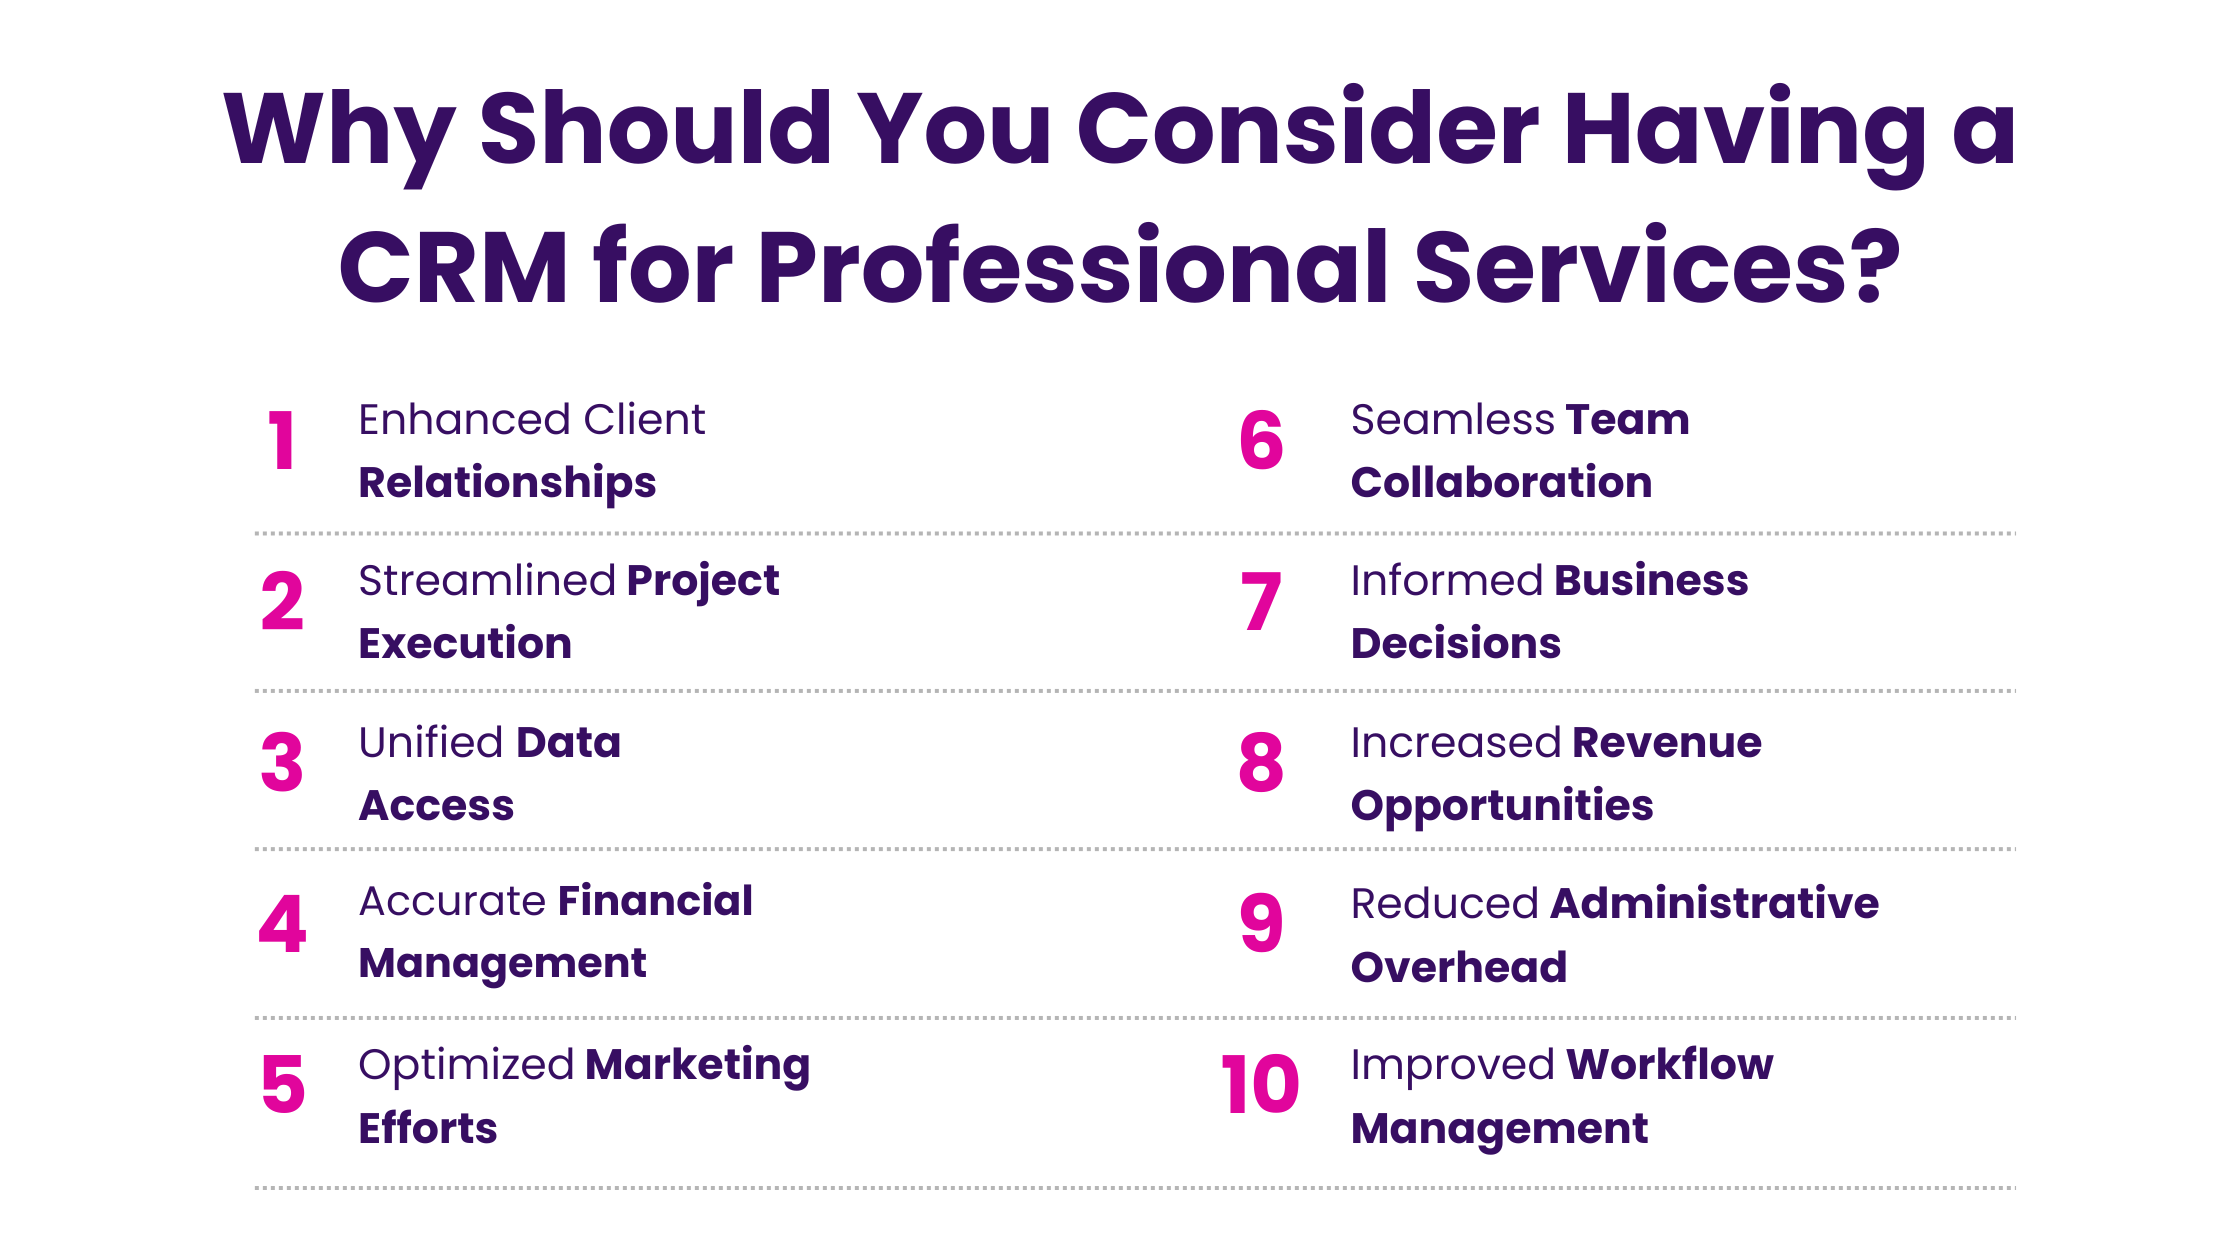 Why Should You Consider Having a CRM for Professional Services